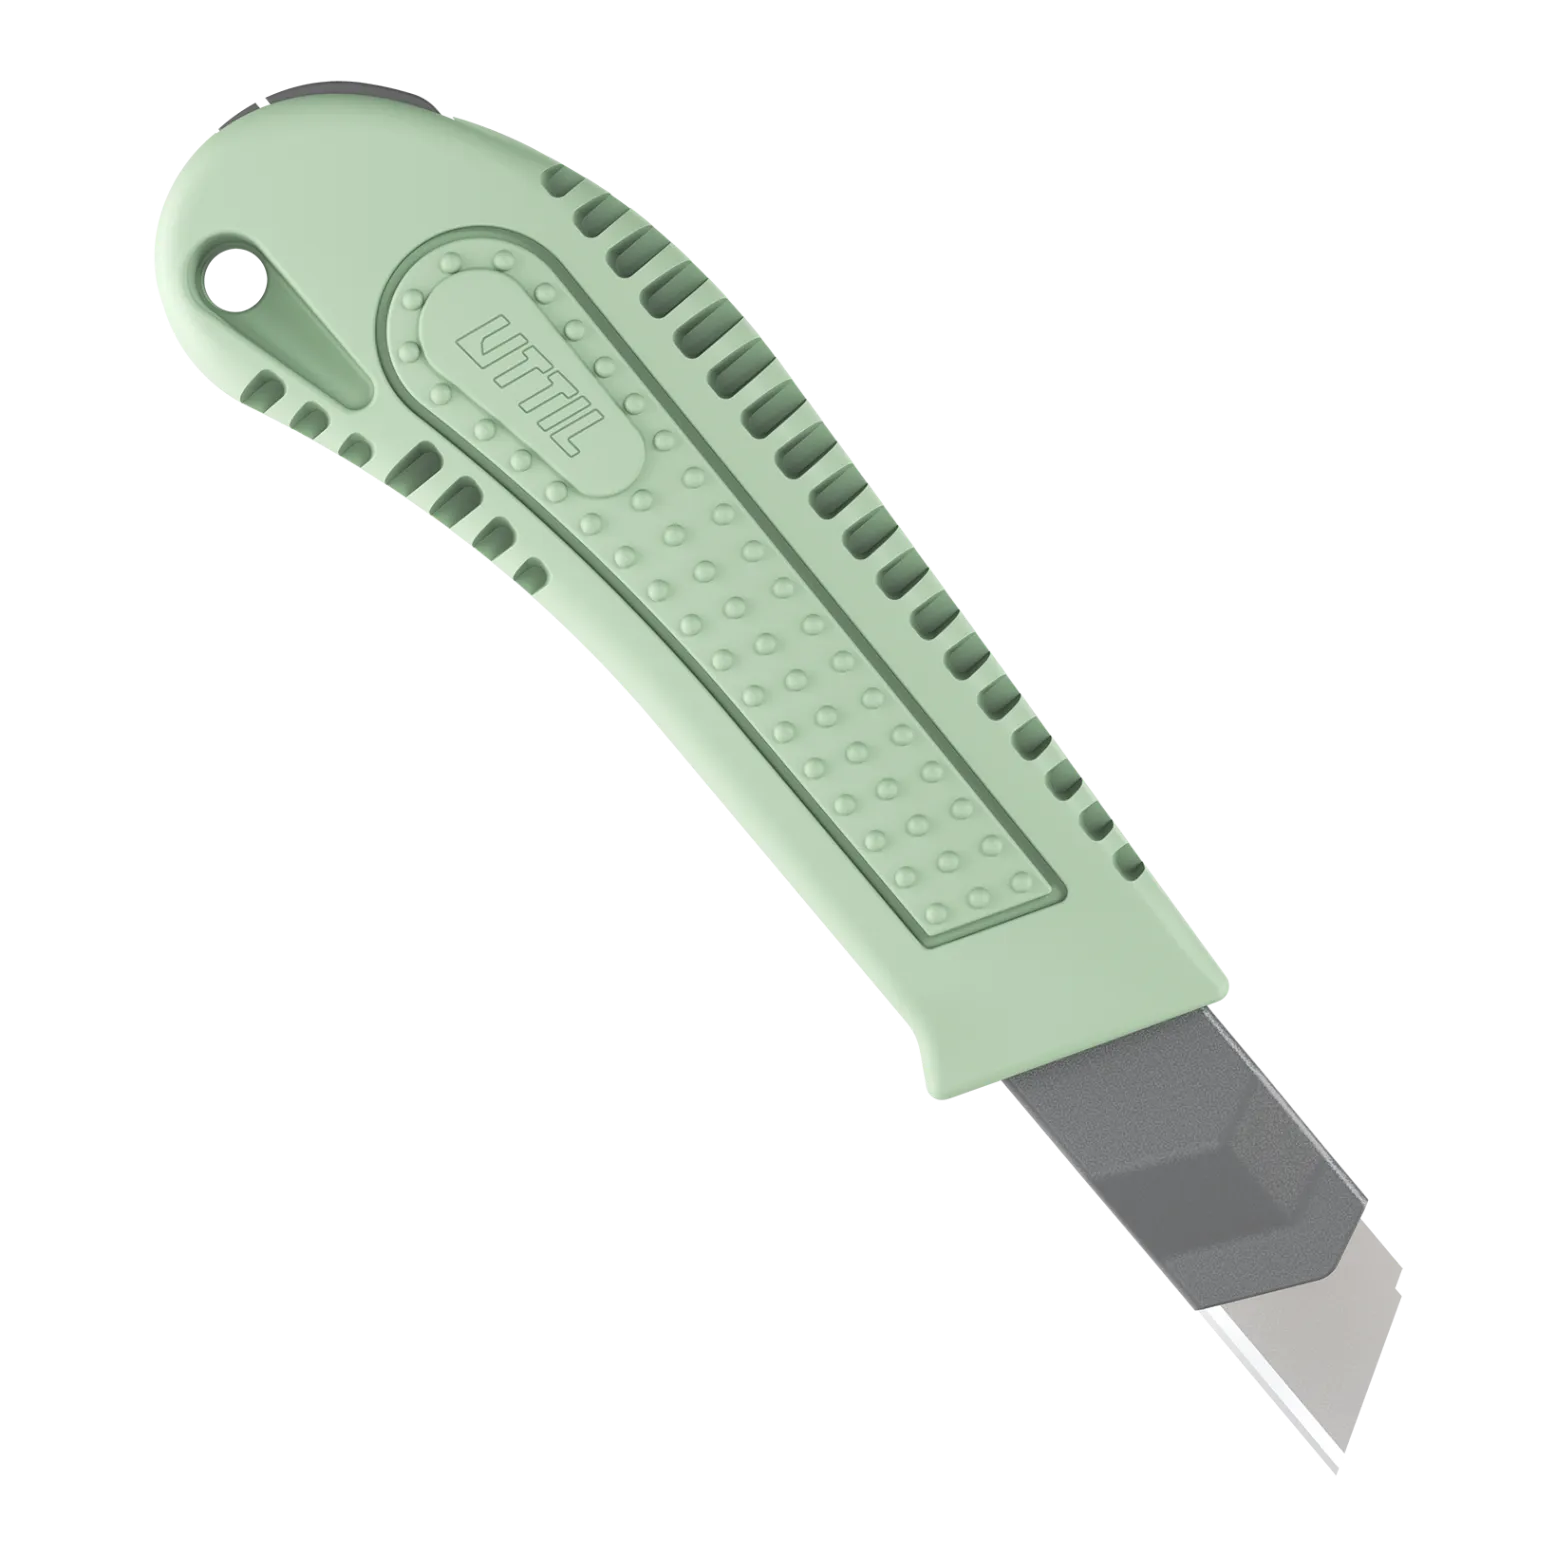 vmuk03-utility knife for light and medium duty in its package